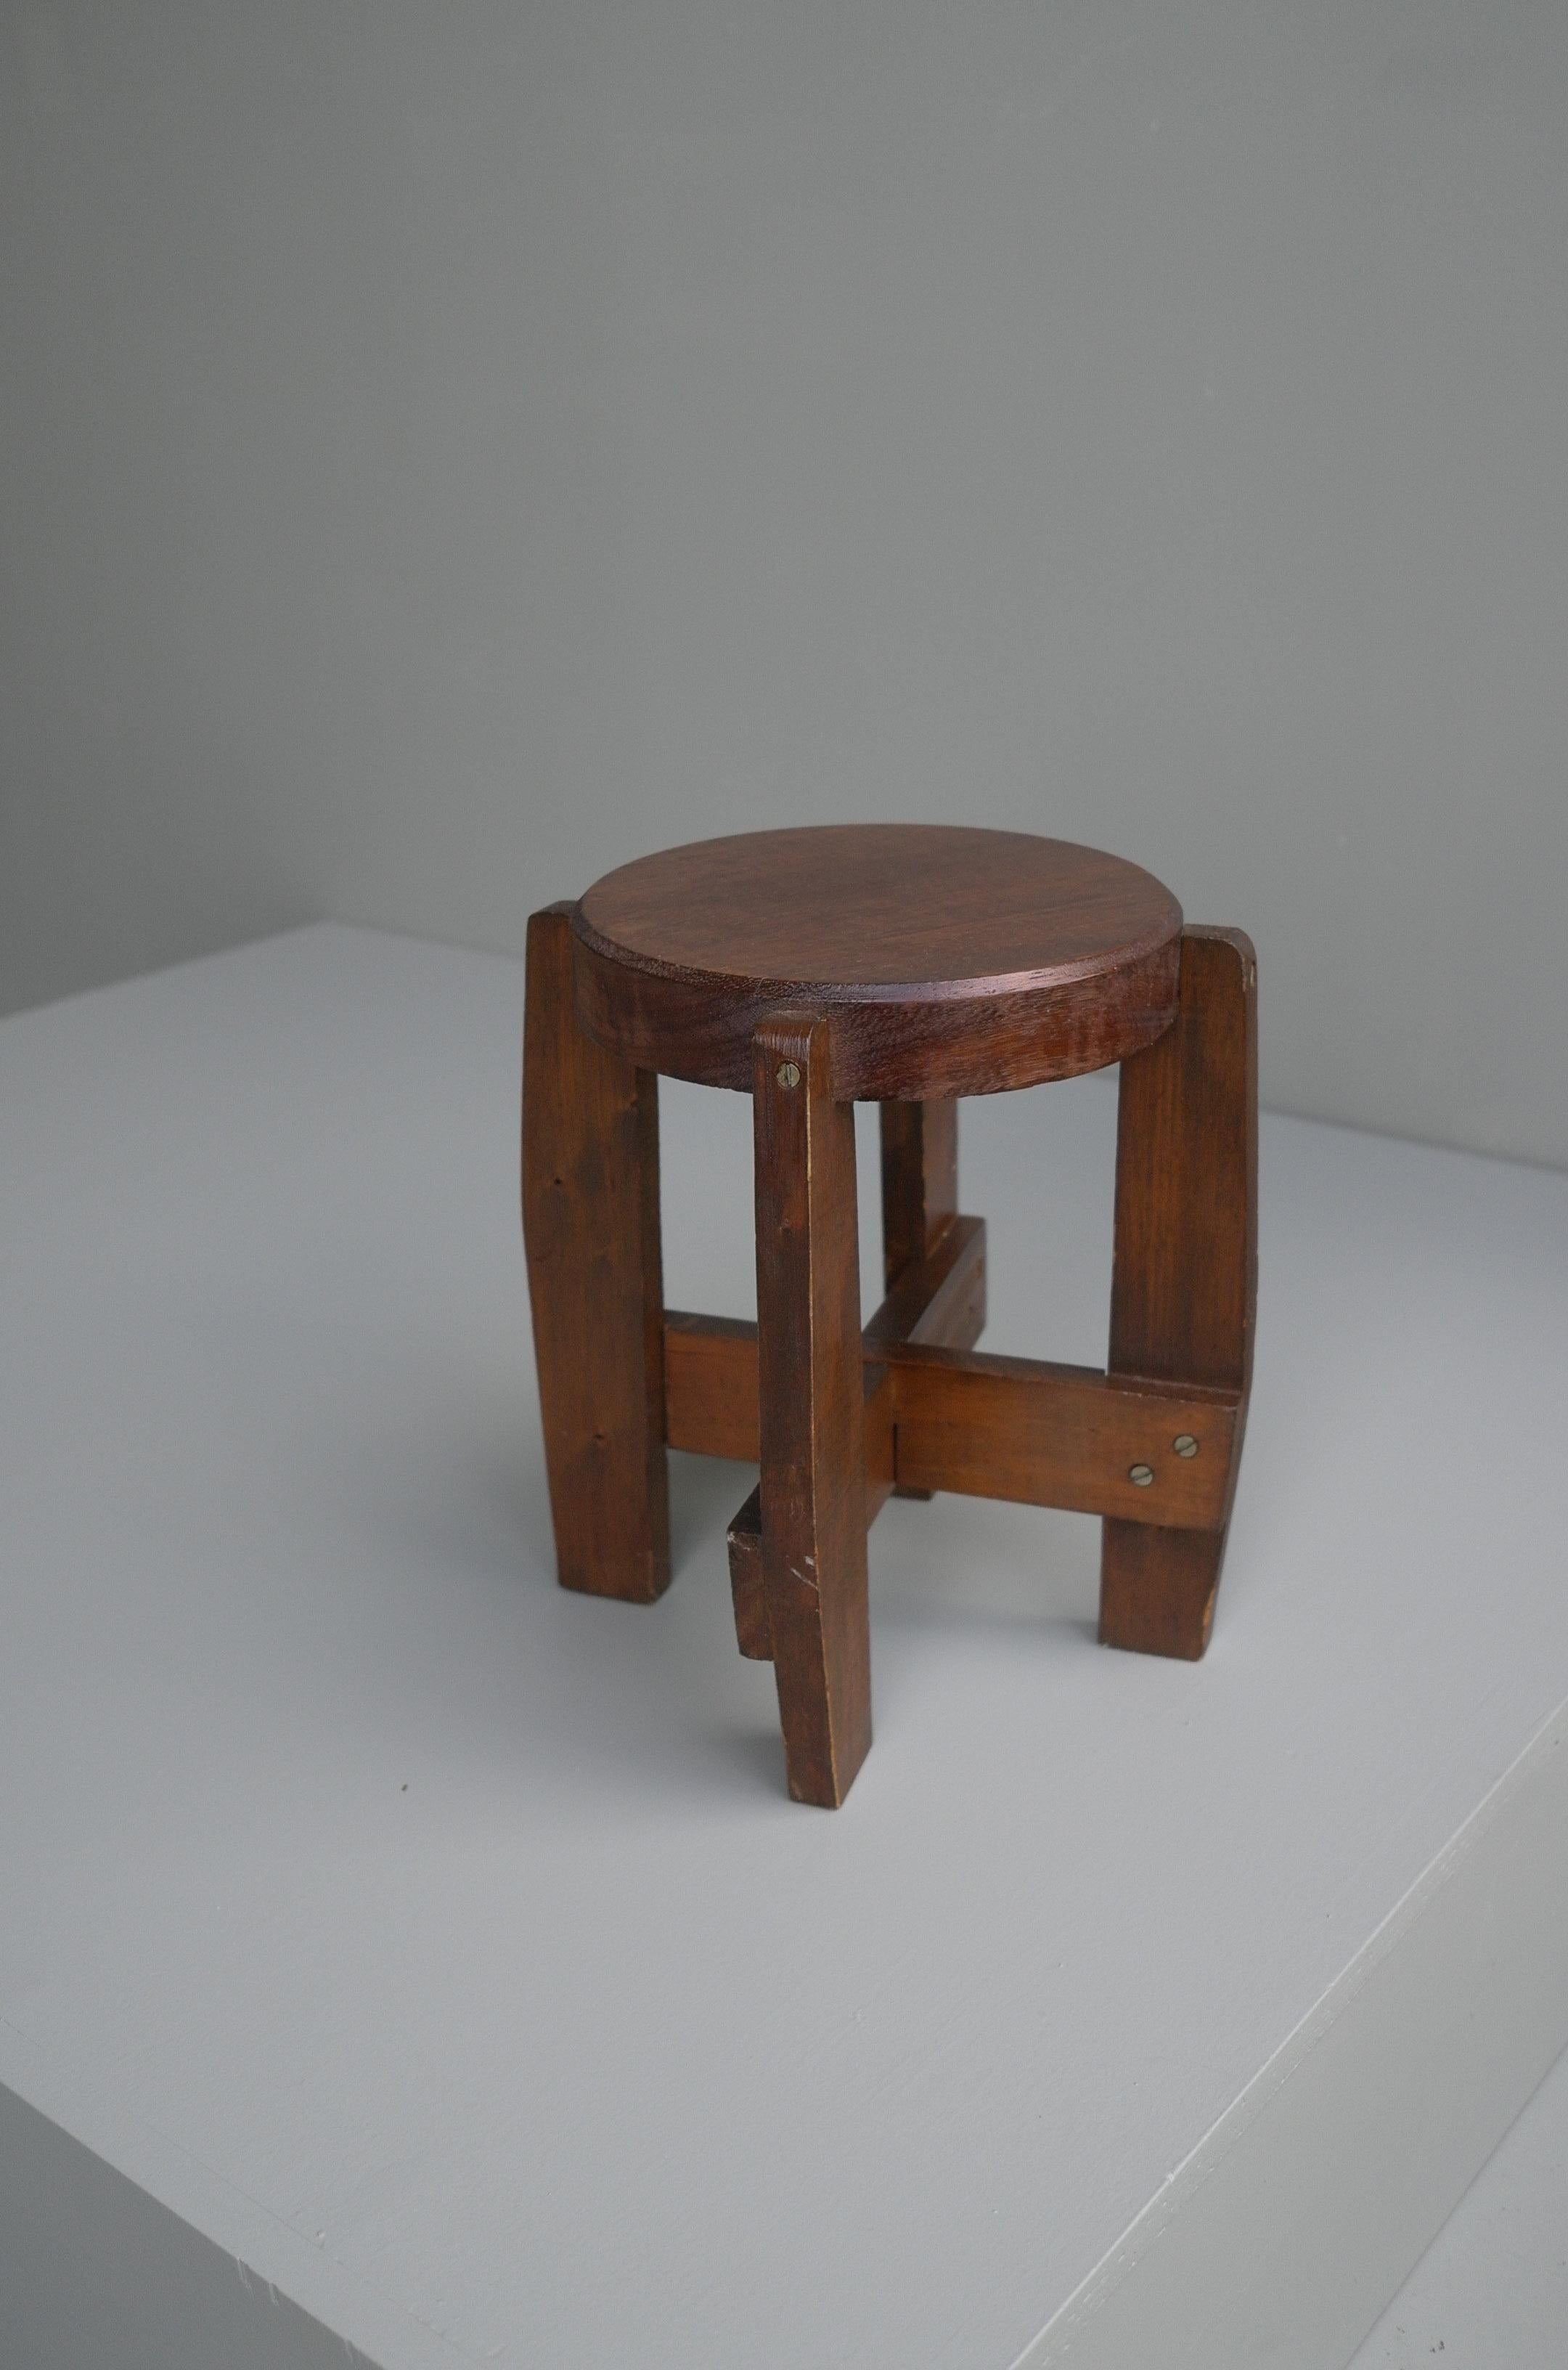 Mid-Century Modern Decorative Wooden Art Deco Stool or Small Side Table, Cubism, 1930's